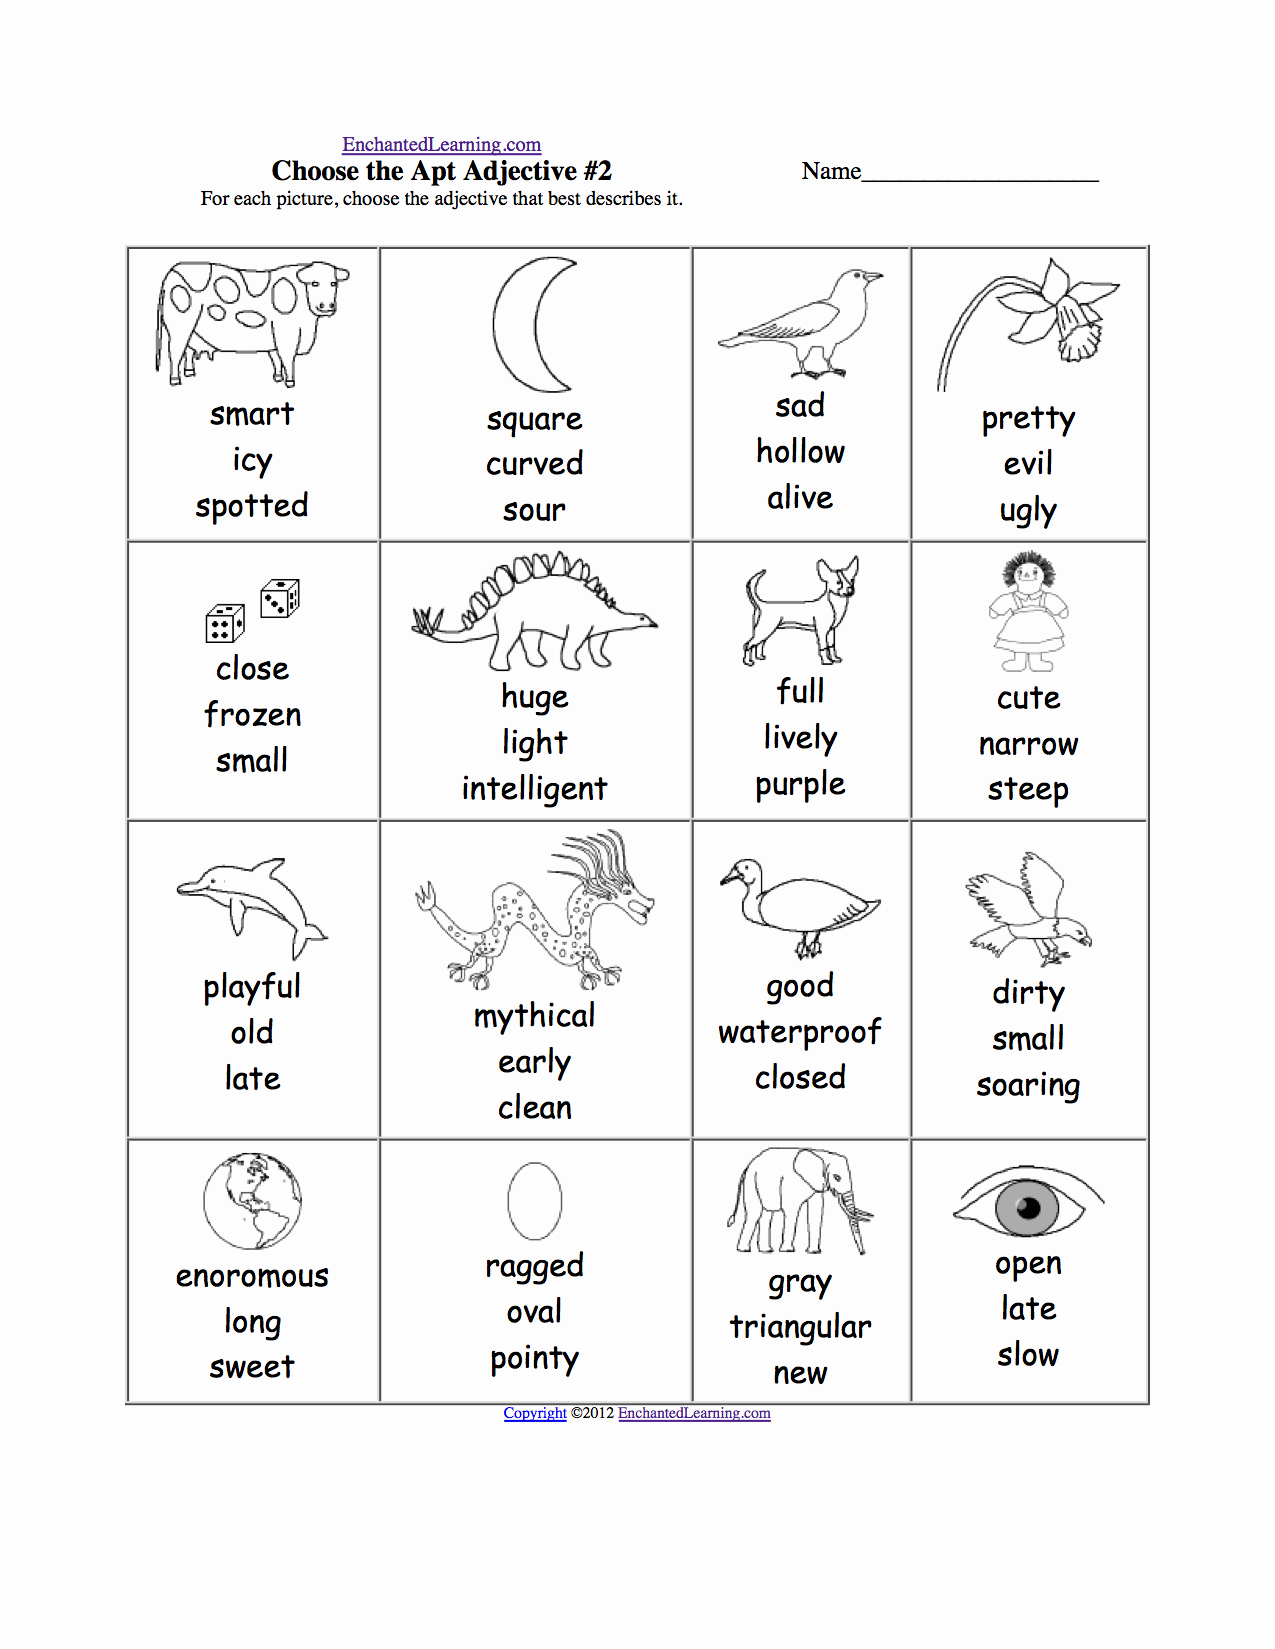 Free Printable Adjective Worksheets Awesome Pick the Apt Adjective Worksheets to Print